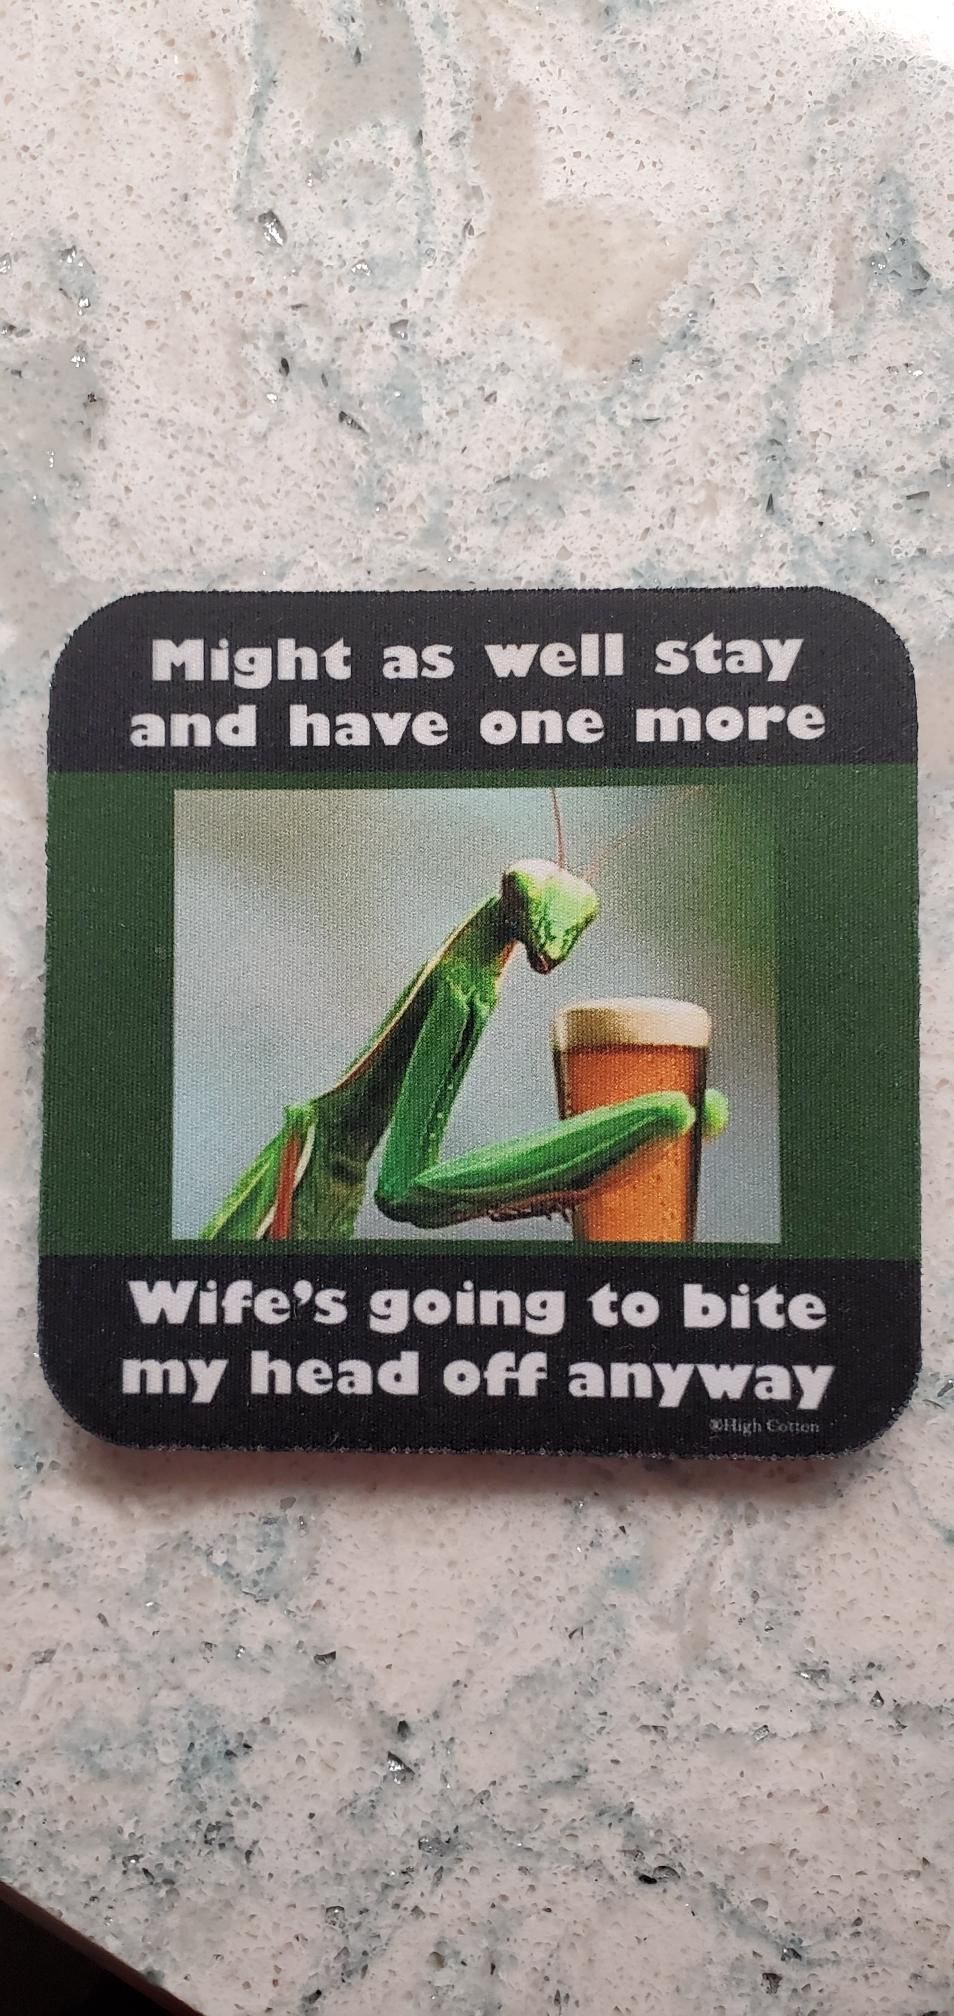 This drink coaster at my parents' house